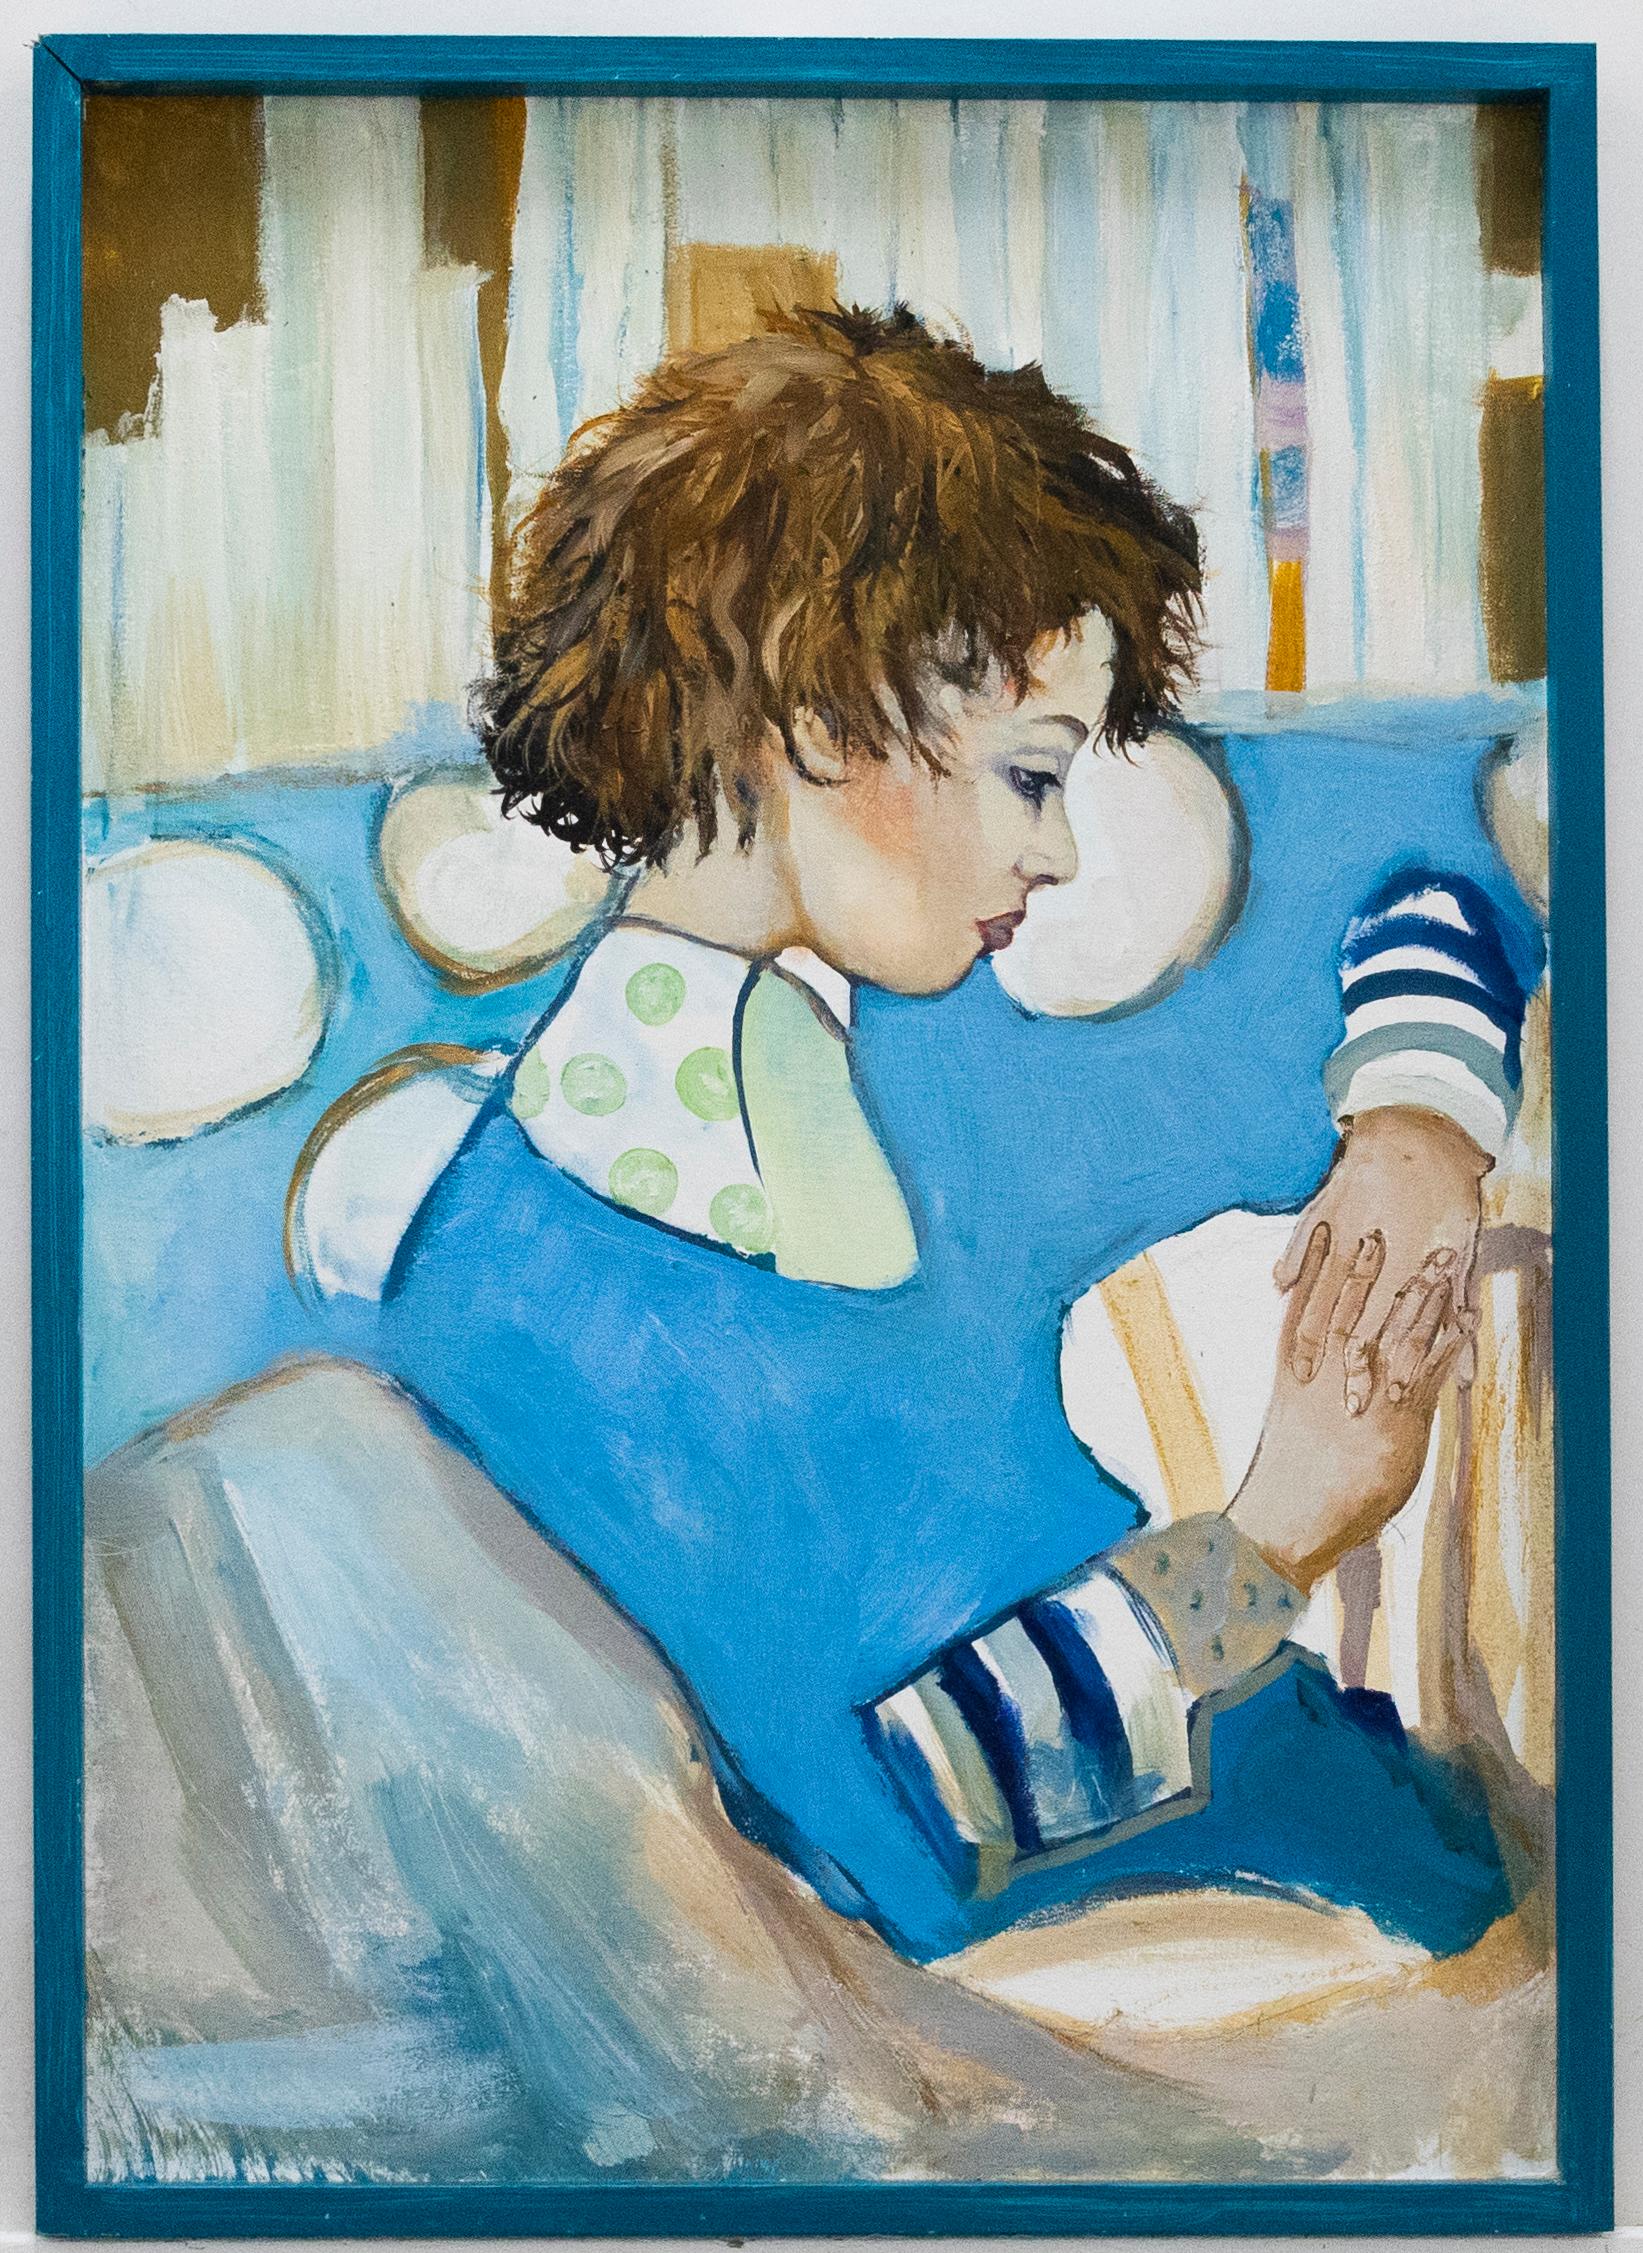 Clive Fredriksson - Clive Fredriksson - Contemporary Oil, The Girl in Blue  For Sale at 1stDibs